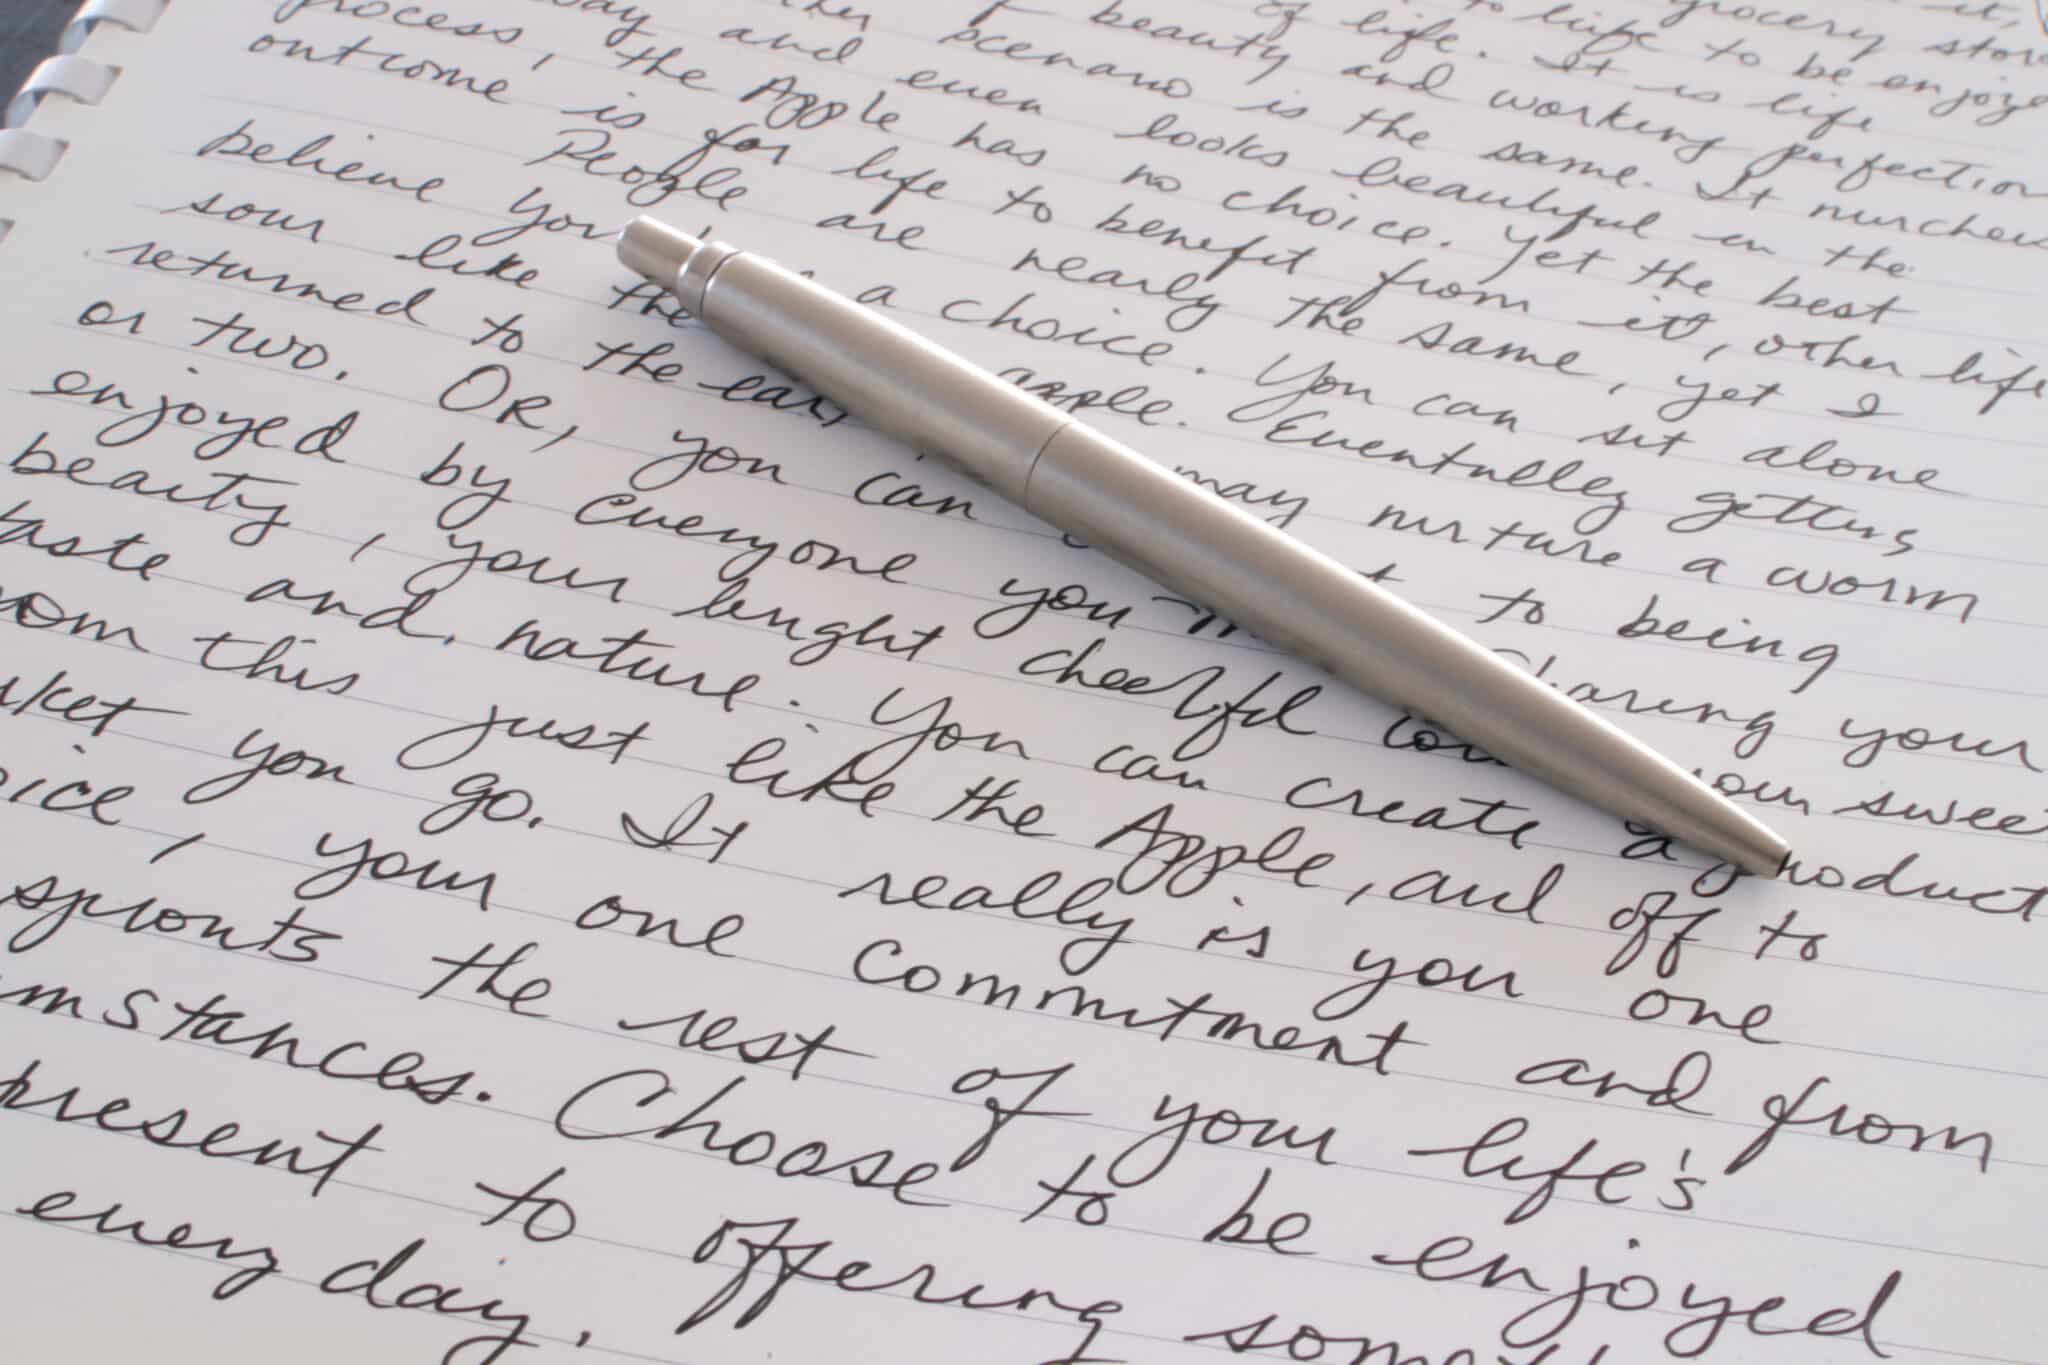 Stainless steel pen on page with text, symbolizes Athreon's transition of written content to digital